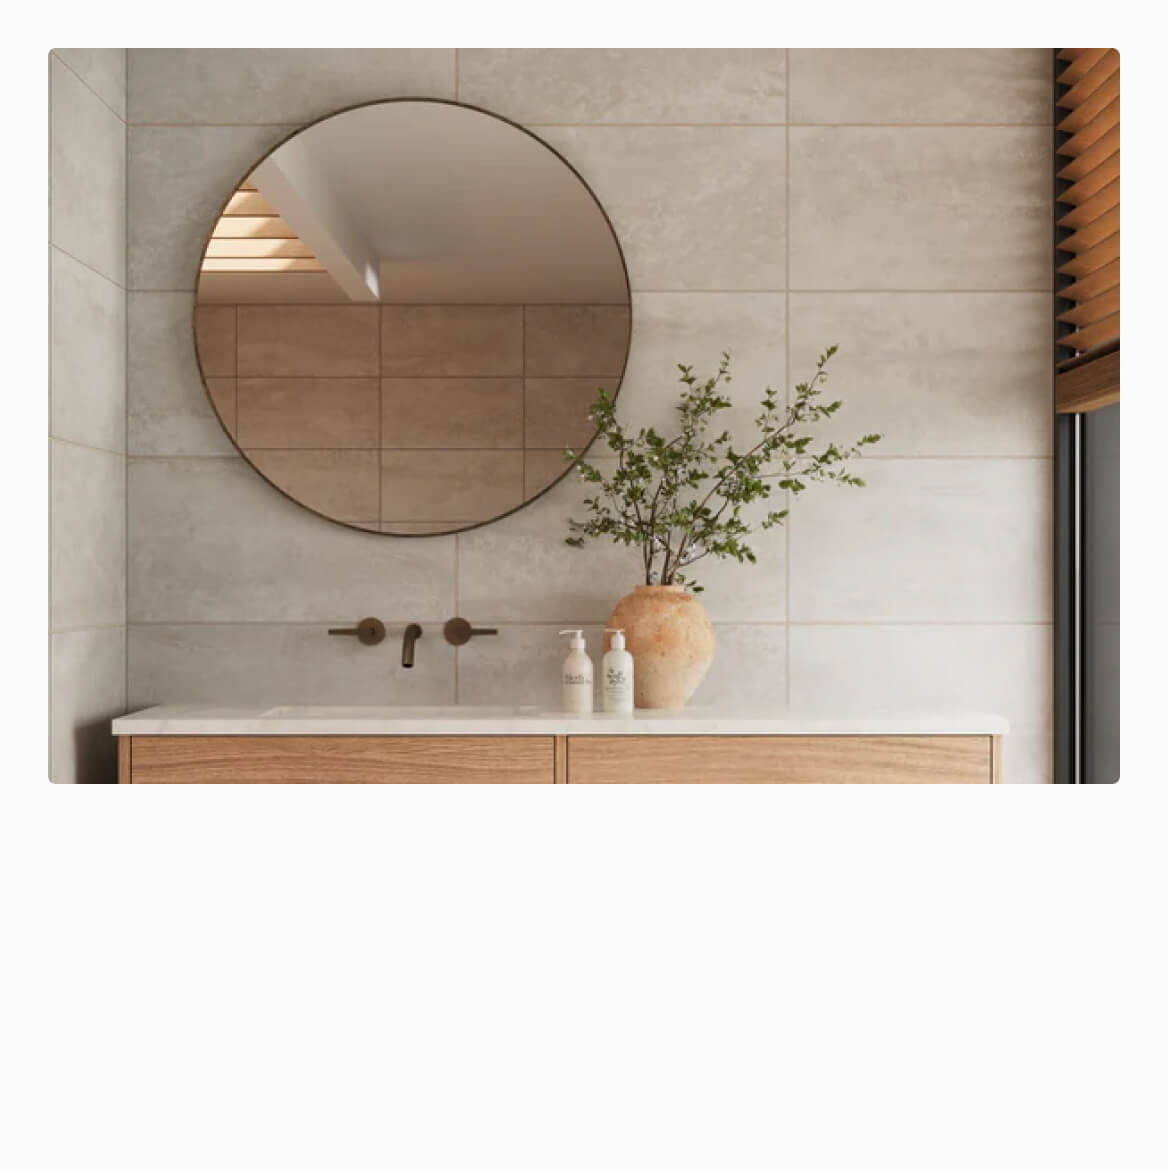 Serene bathroom vanity area featuring a round mirror, 12x24 neutral tiles, and warm wooden accents